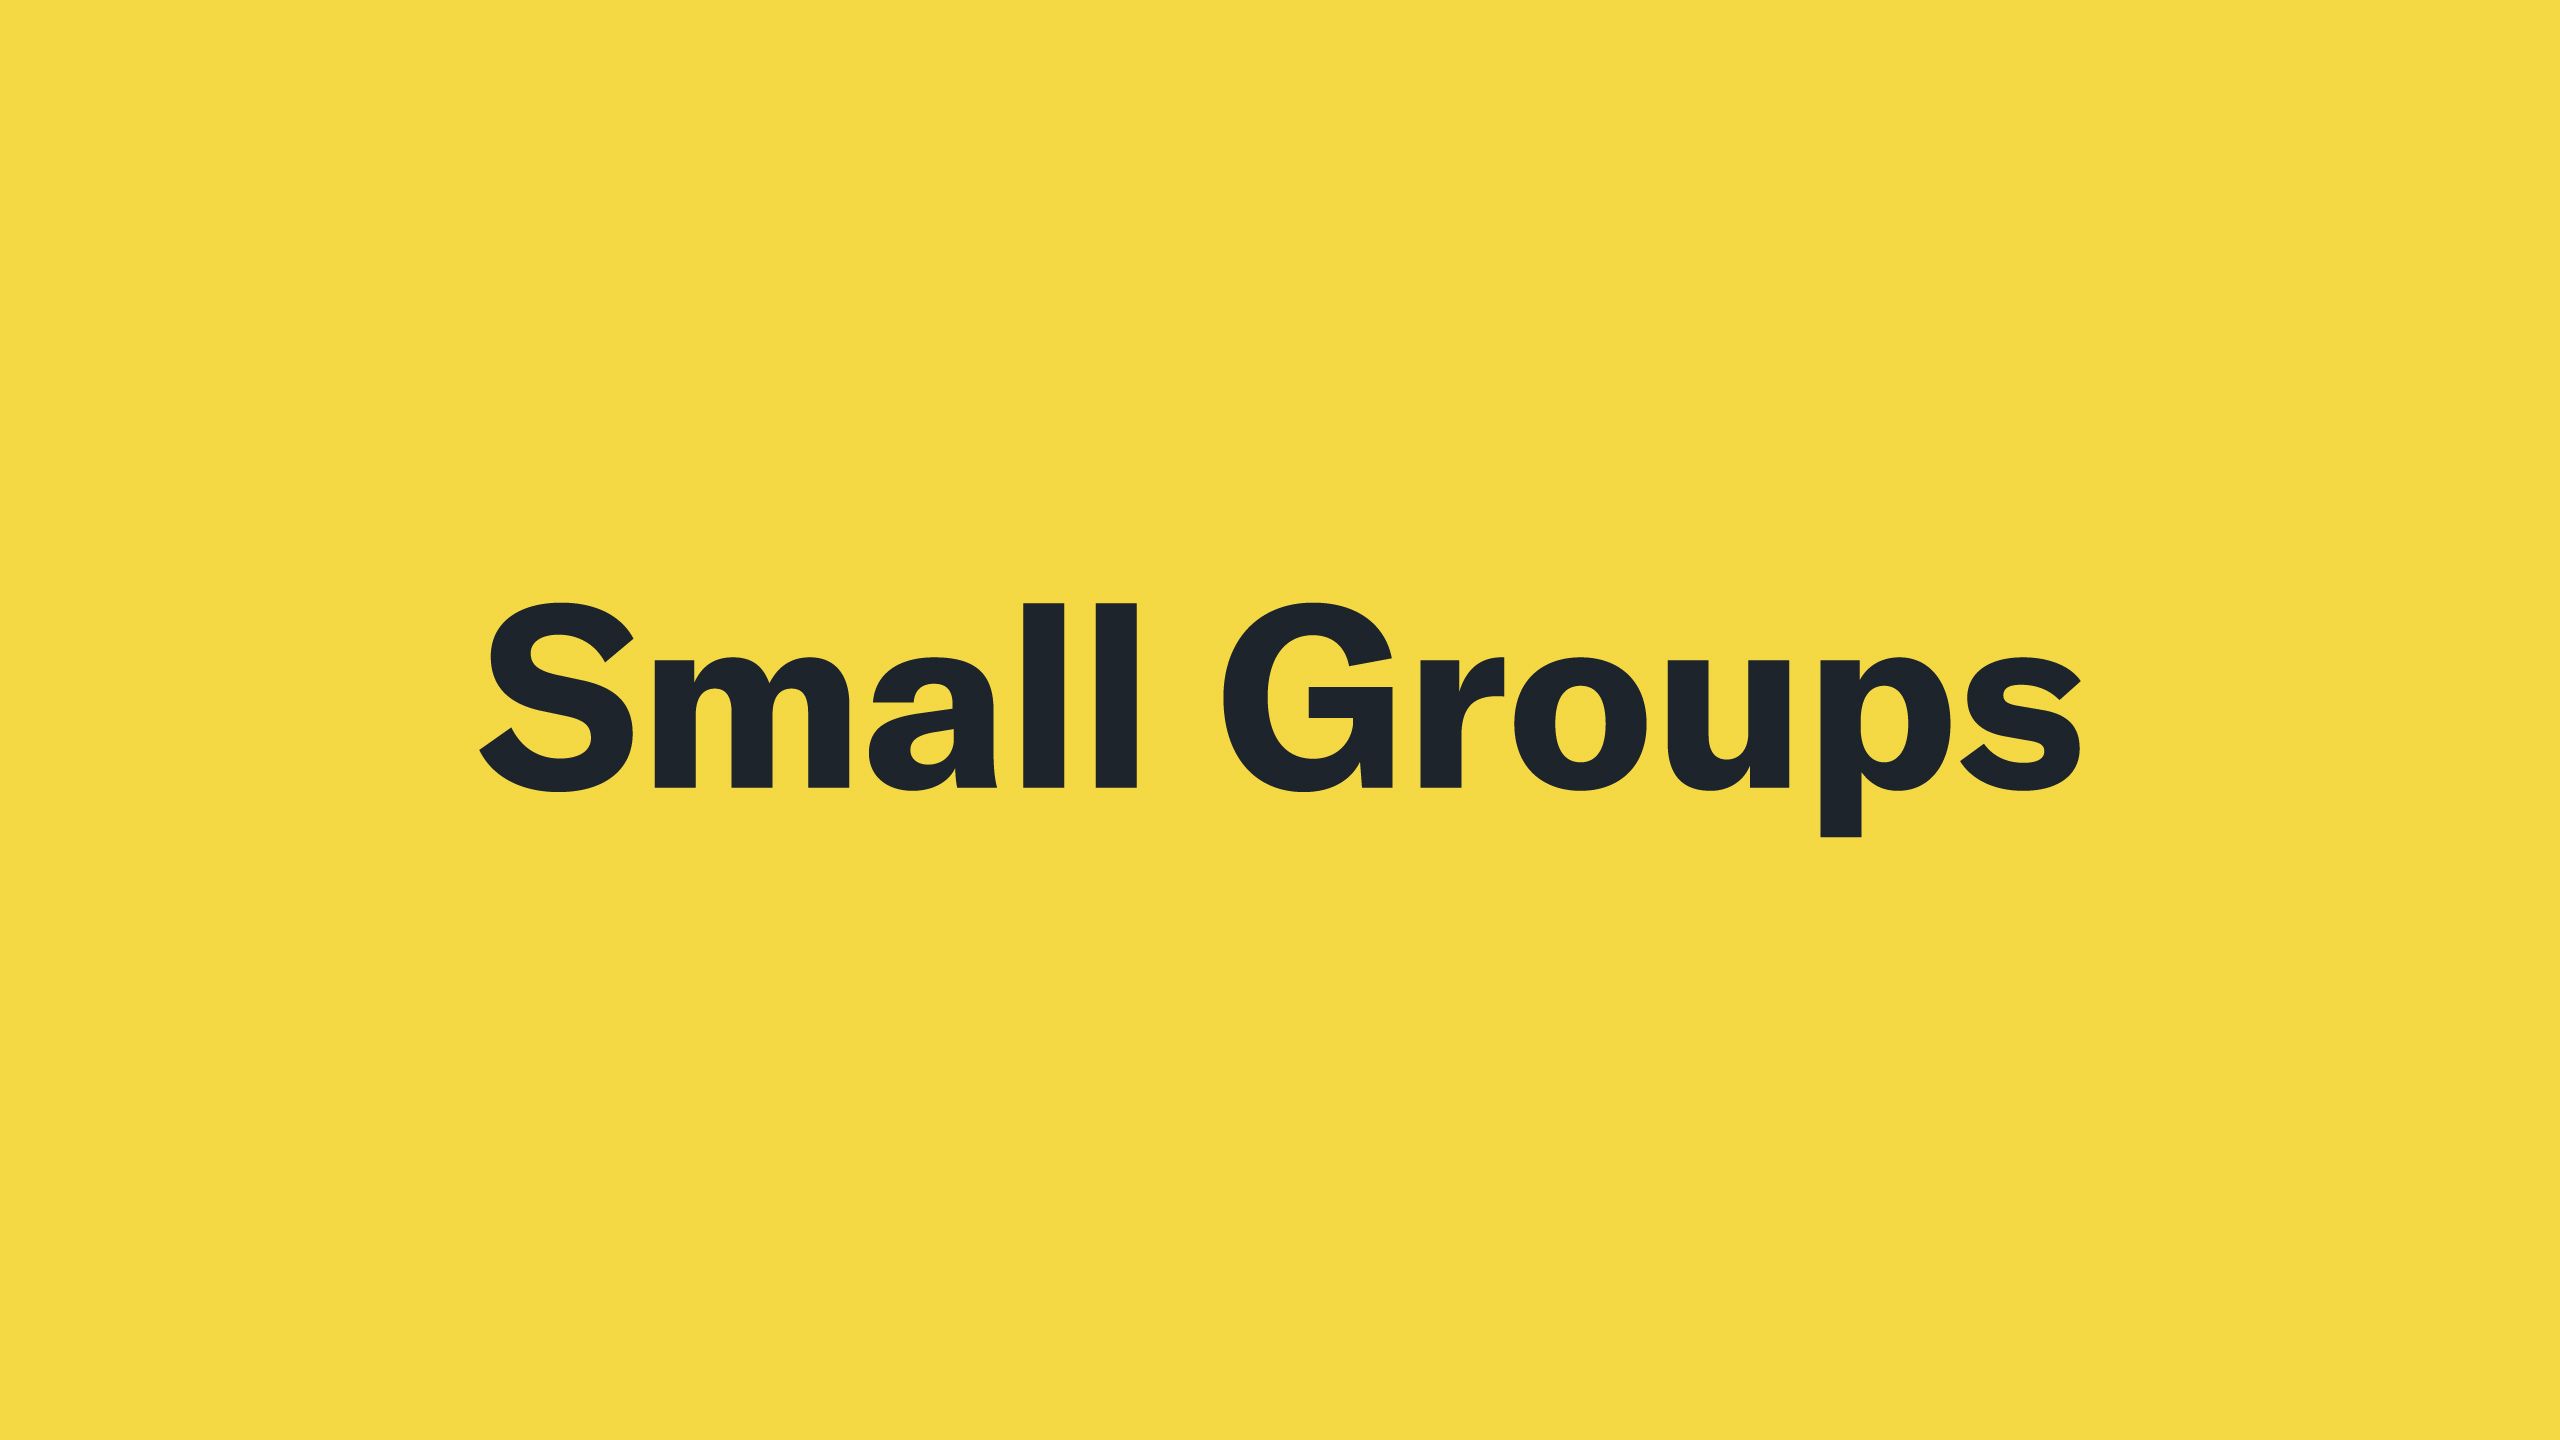 Lead a Small Group